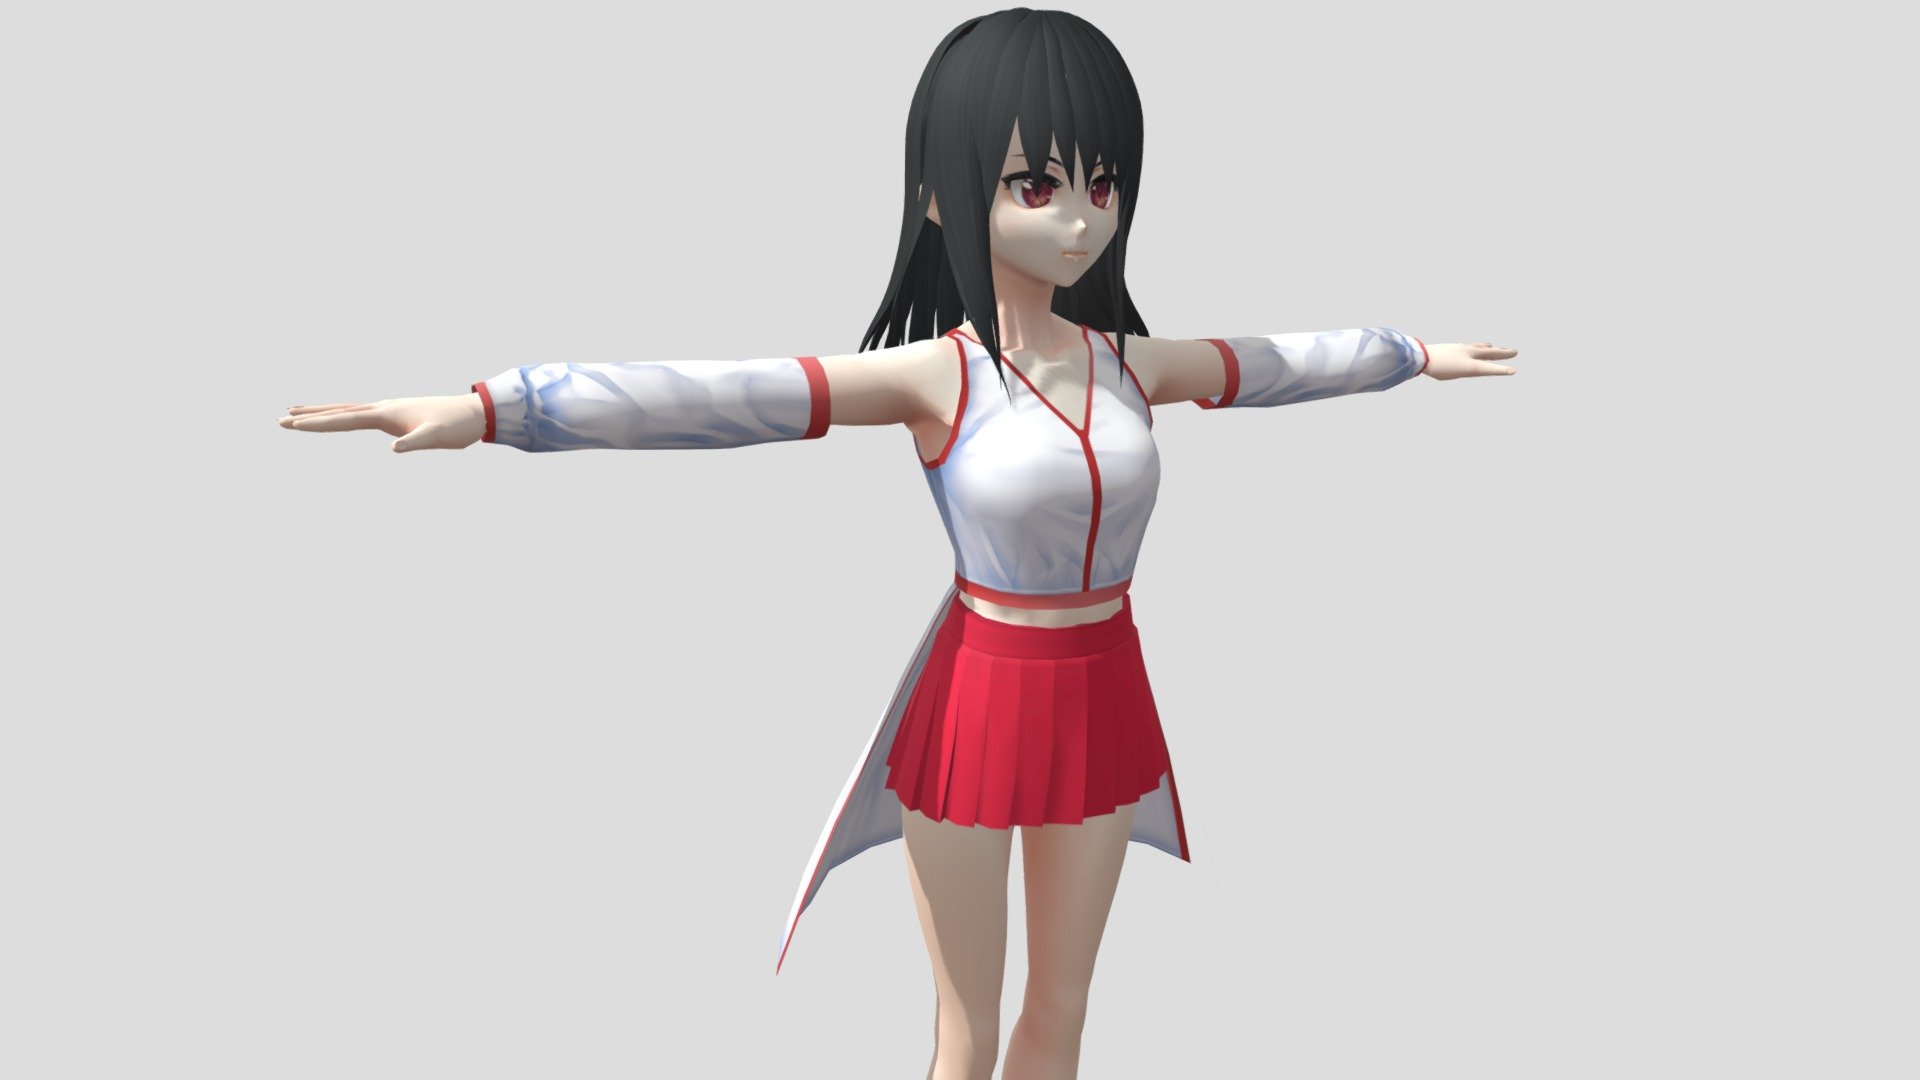 Model preview



This character model belongs to Japanese anime style, all models has been converted into fbx file using blender, users can add their favorite animations on mixamo website, then apply to unity versions above 2019



Character : Sakura

Verts:20296

Tris:28698

Fifteen textures for the character



This package contains VRM files, which can make the character module more refined, please refer to the manual for details



▶Commercial use allowed

▶Forbid secondary sales



Welcome add my website to credit :

Sketchfab

Pixiv

VRoidHub
 - 【Anime Character / alex94i60】Sakura (Miko) - Buy Royalty Free 3D model by 3D動漫風角色屋 / 3D Anime Character Store (@alex94i60) 3d model